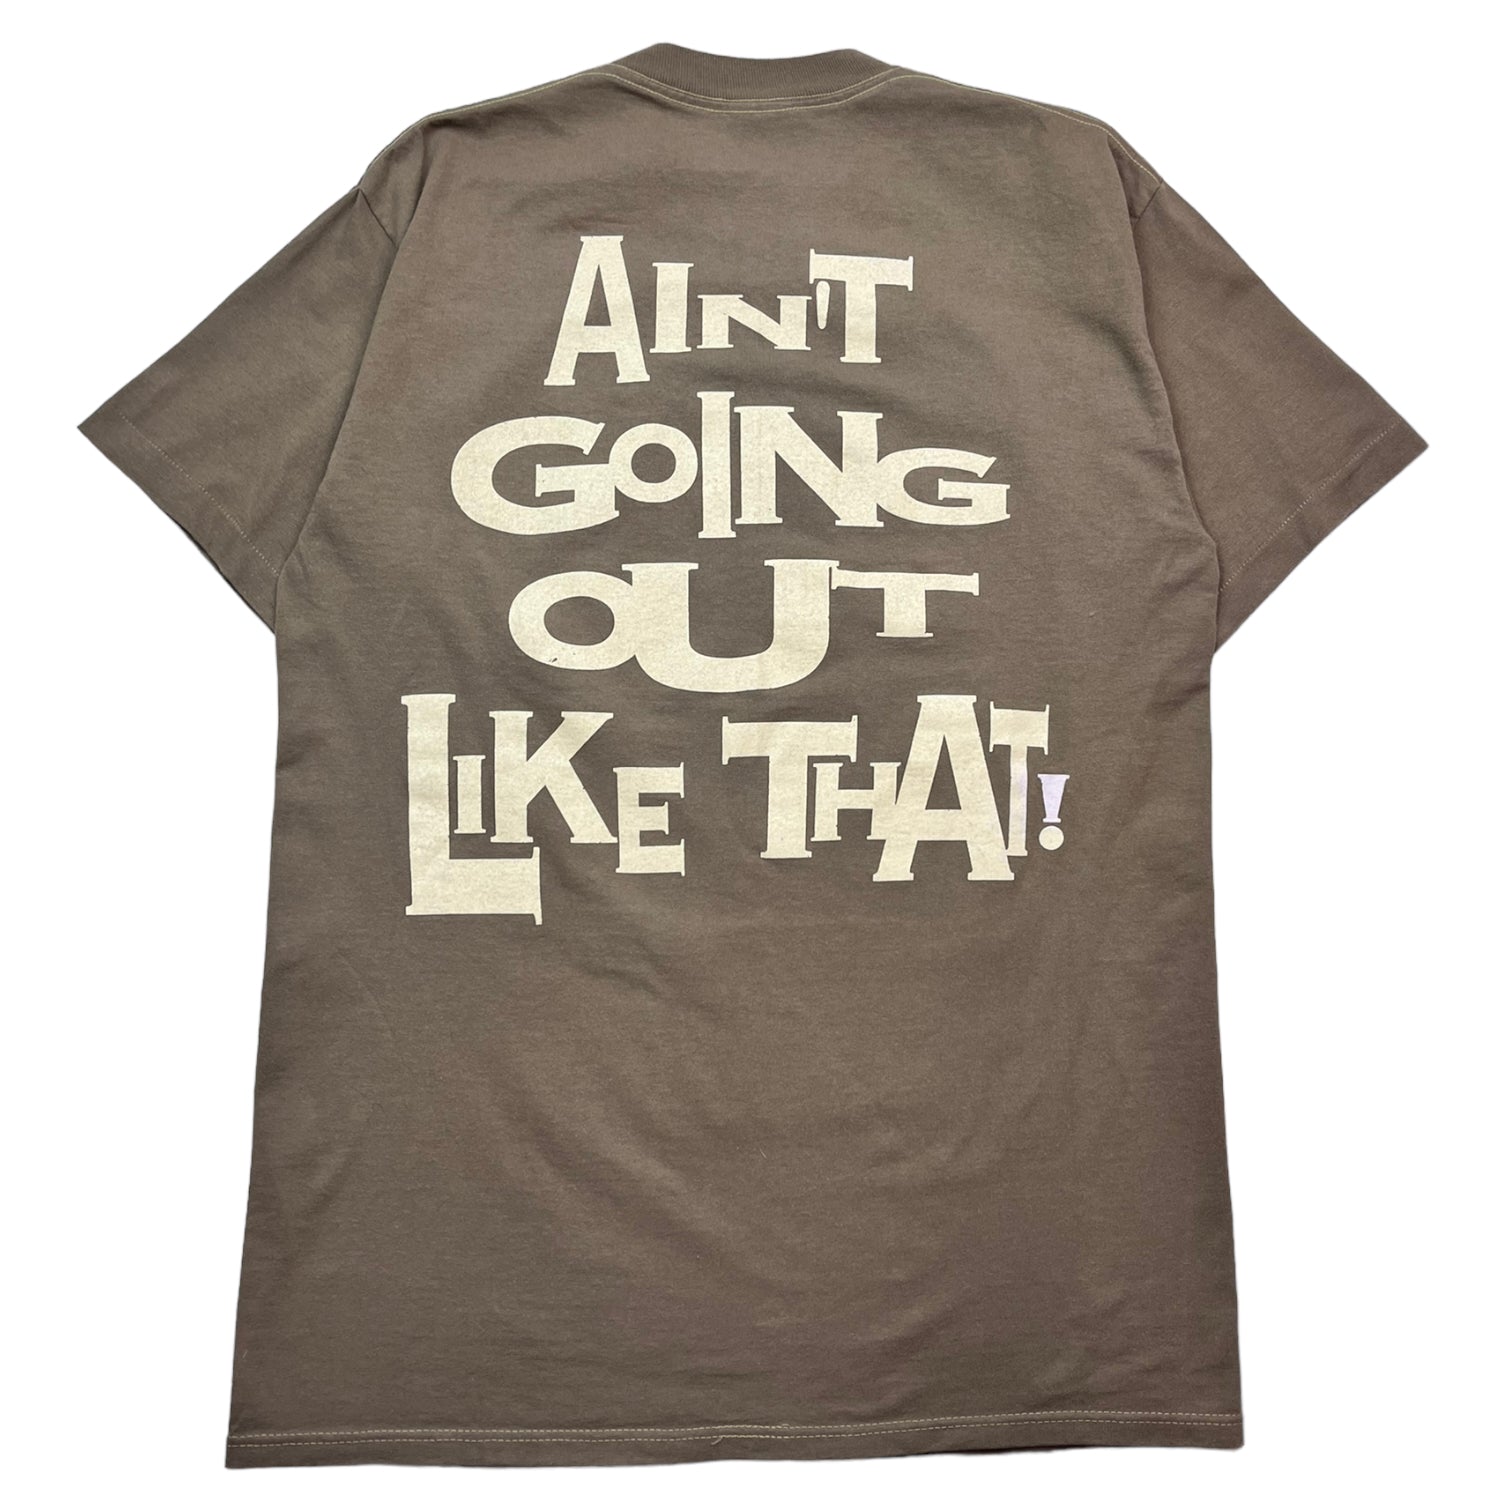 Vintage 90’s Cypress Hill “Ain’t Going Out Like That” Tee